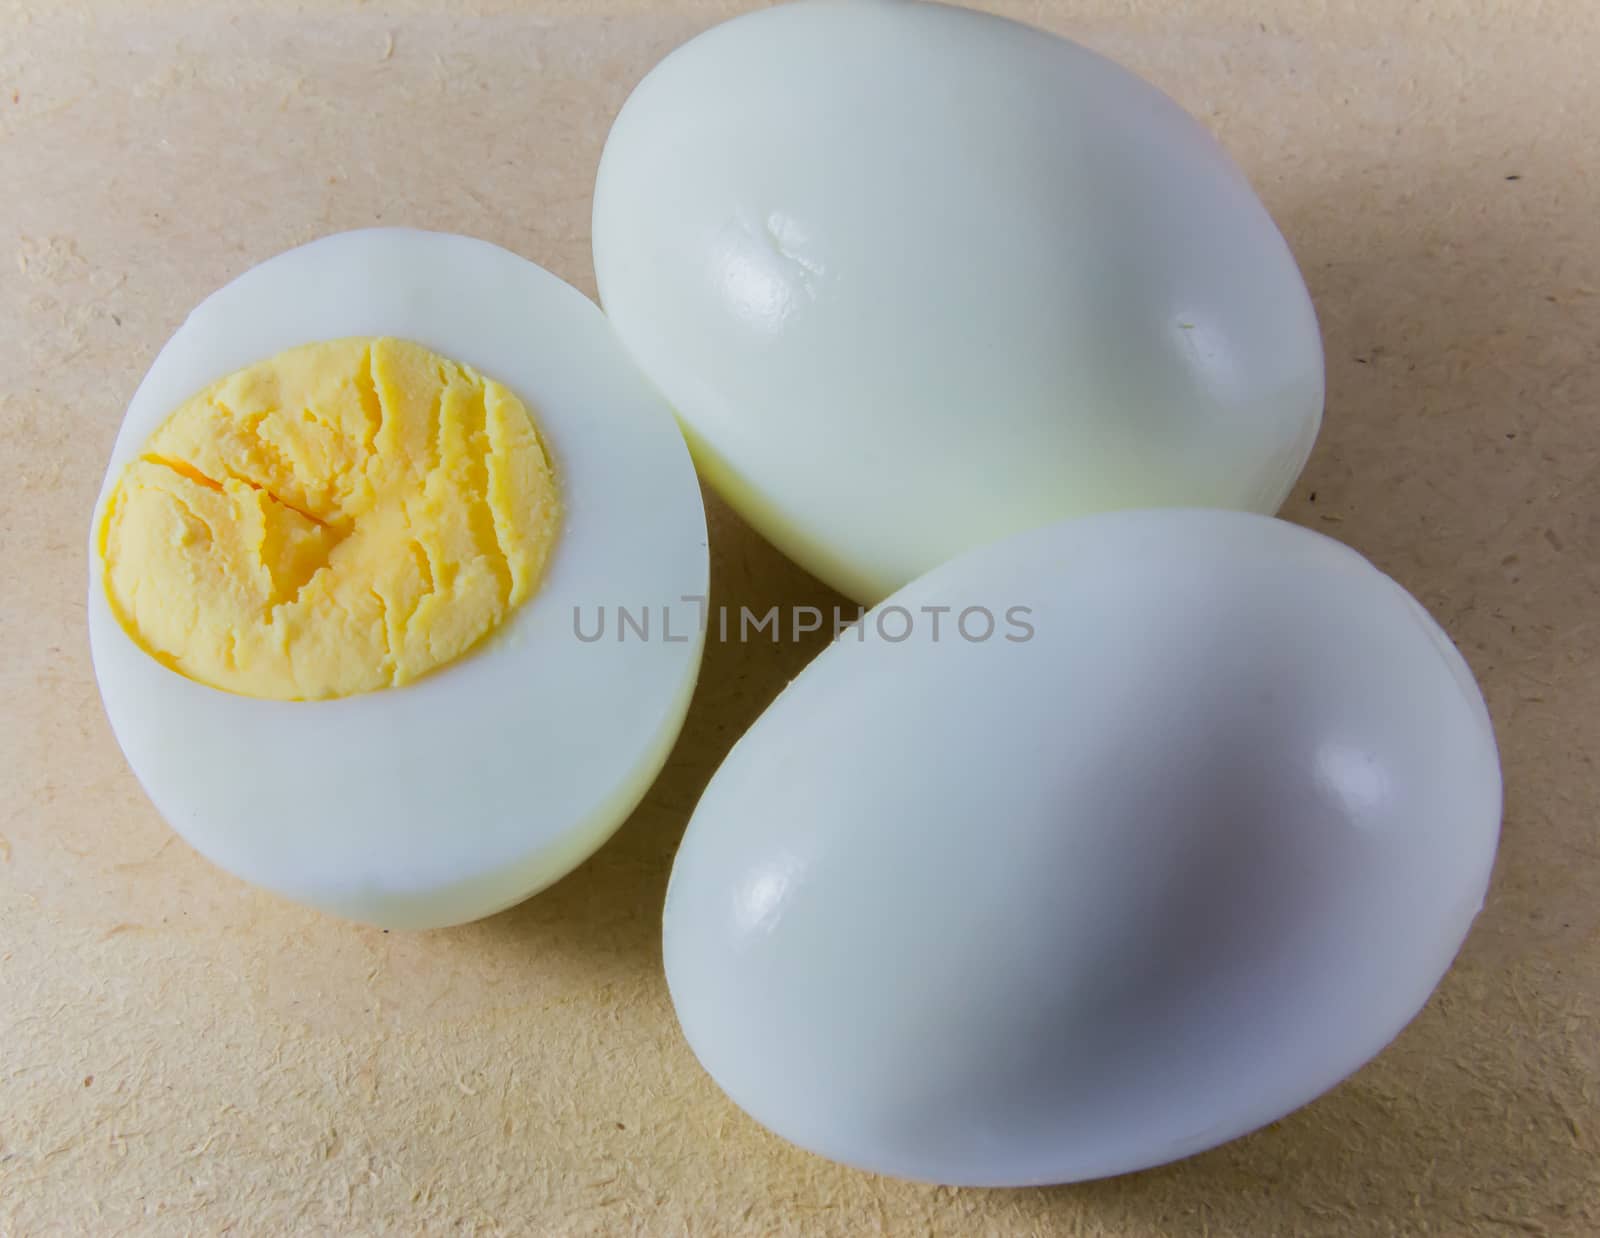 Boiled eggs are foods that are nutritional.For those who want to protein diet